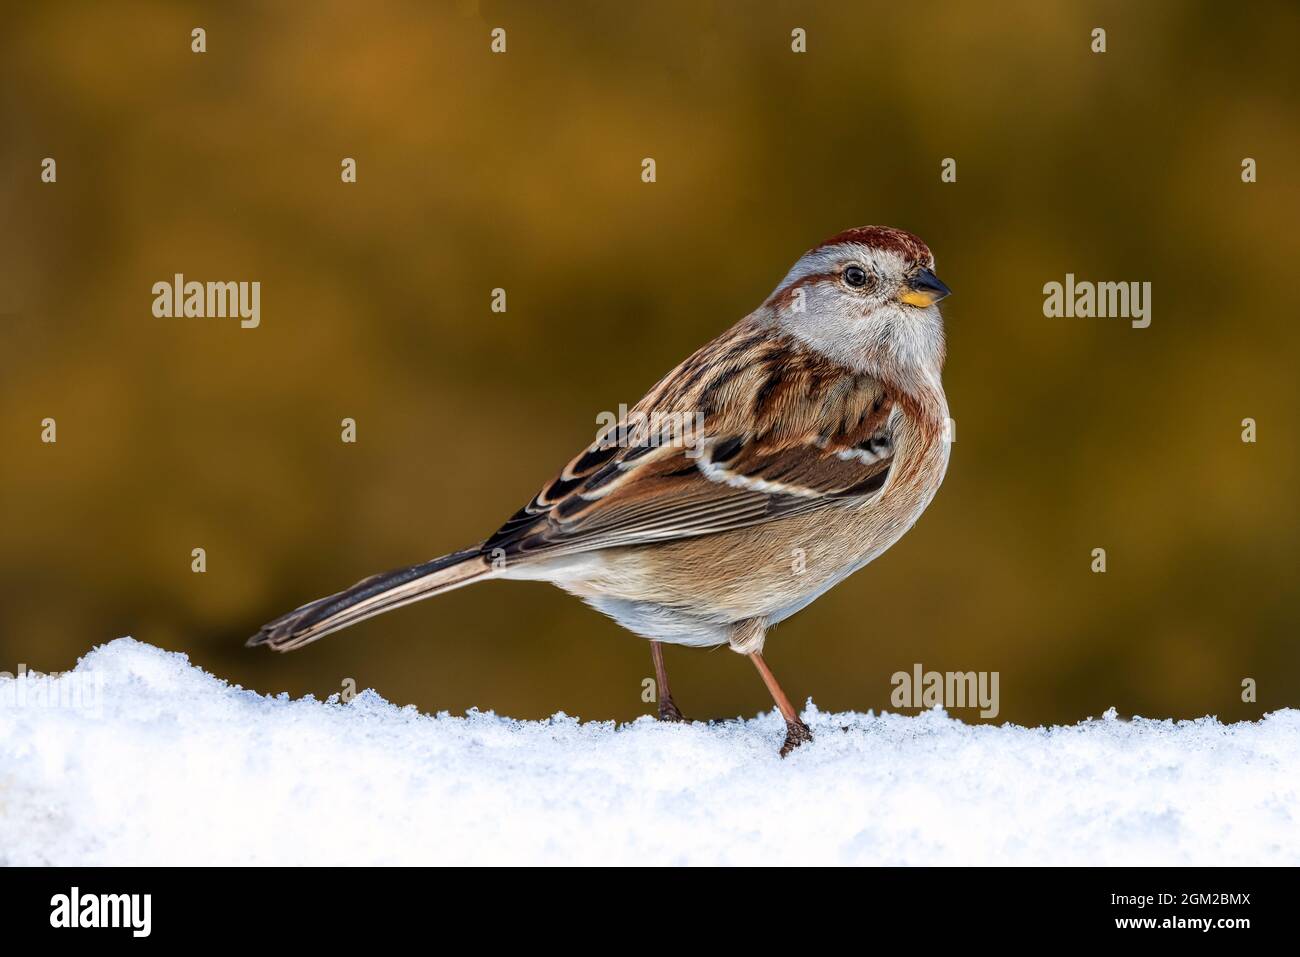 American Tree Sparrow portrait on fresh snow against a warm background.  This image is also available as a black and white.   To view additional image Stock Photo